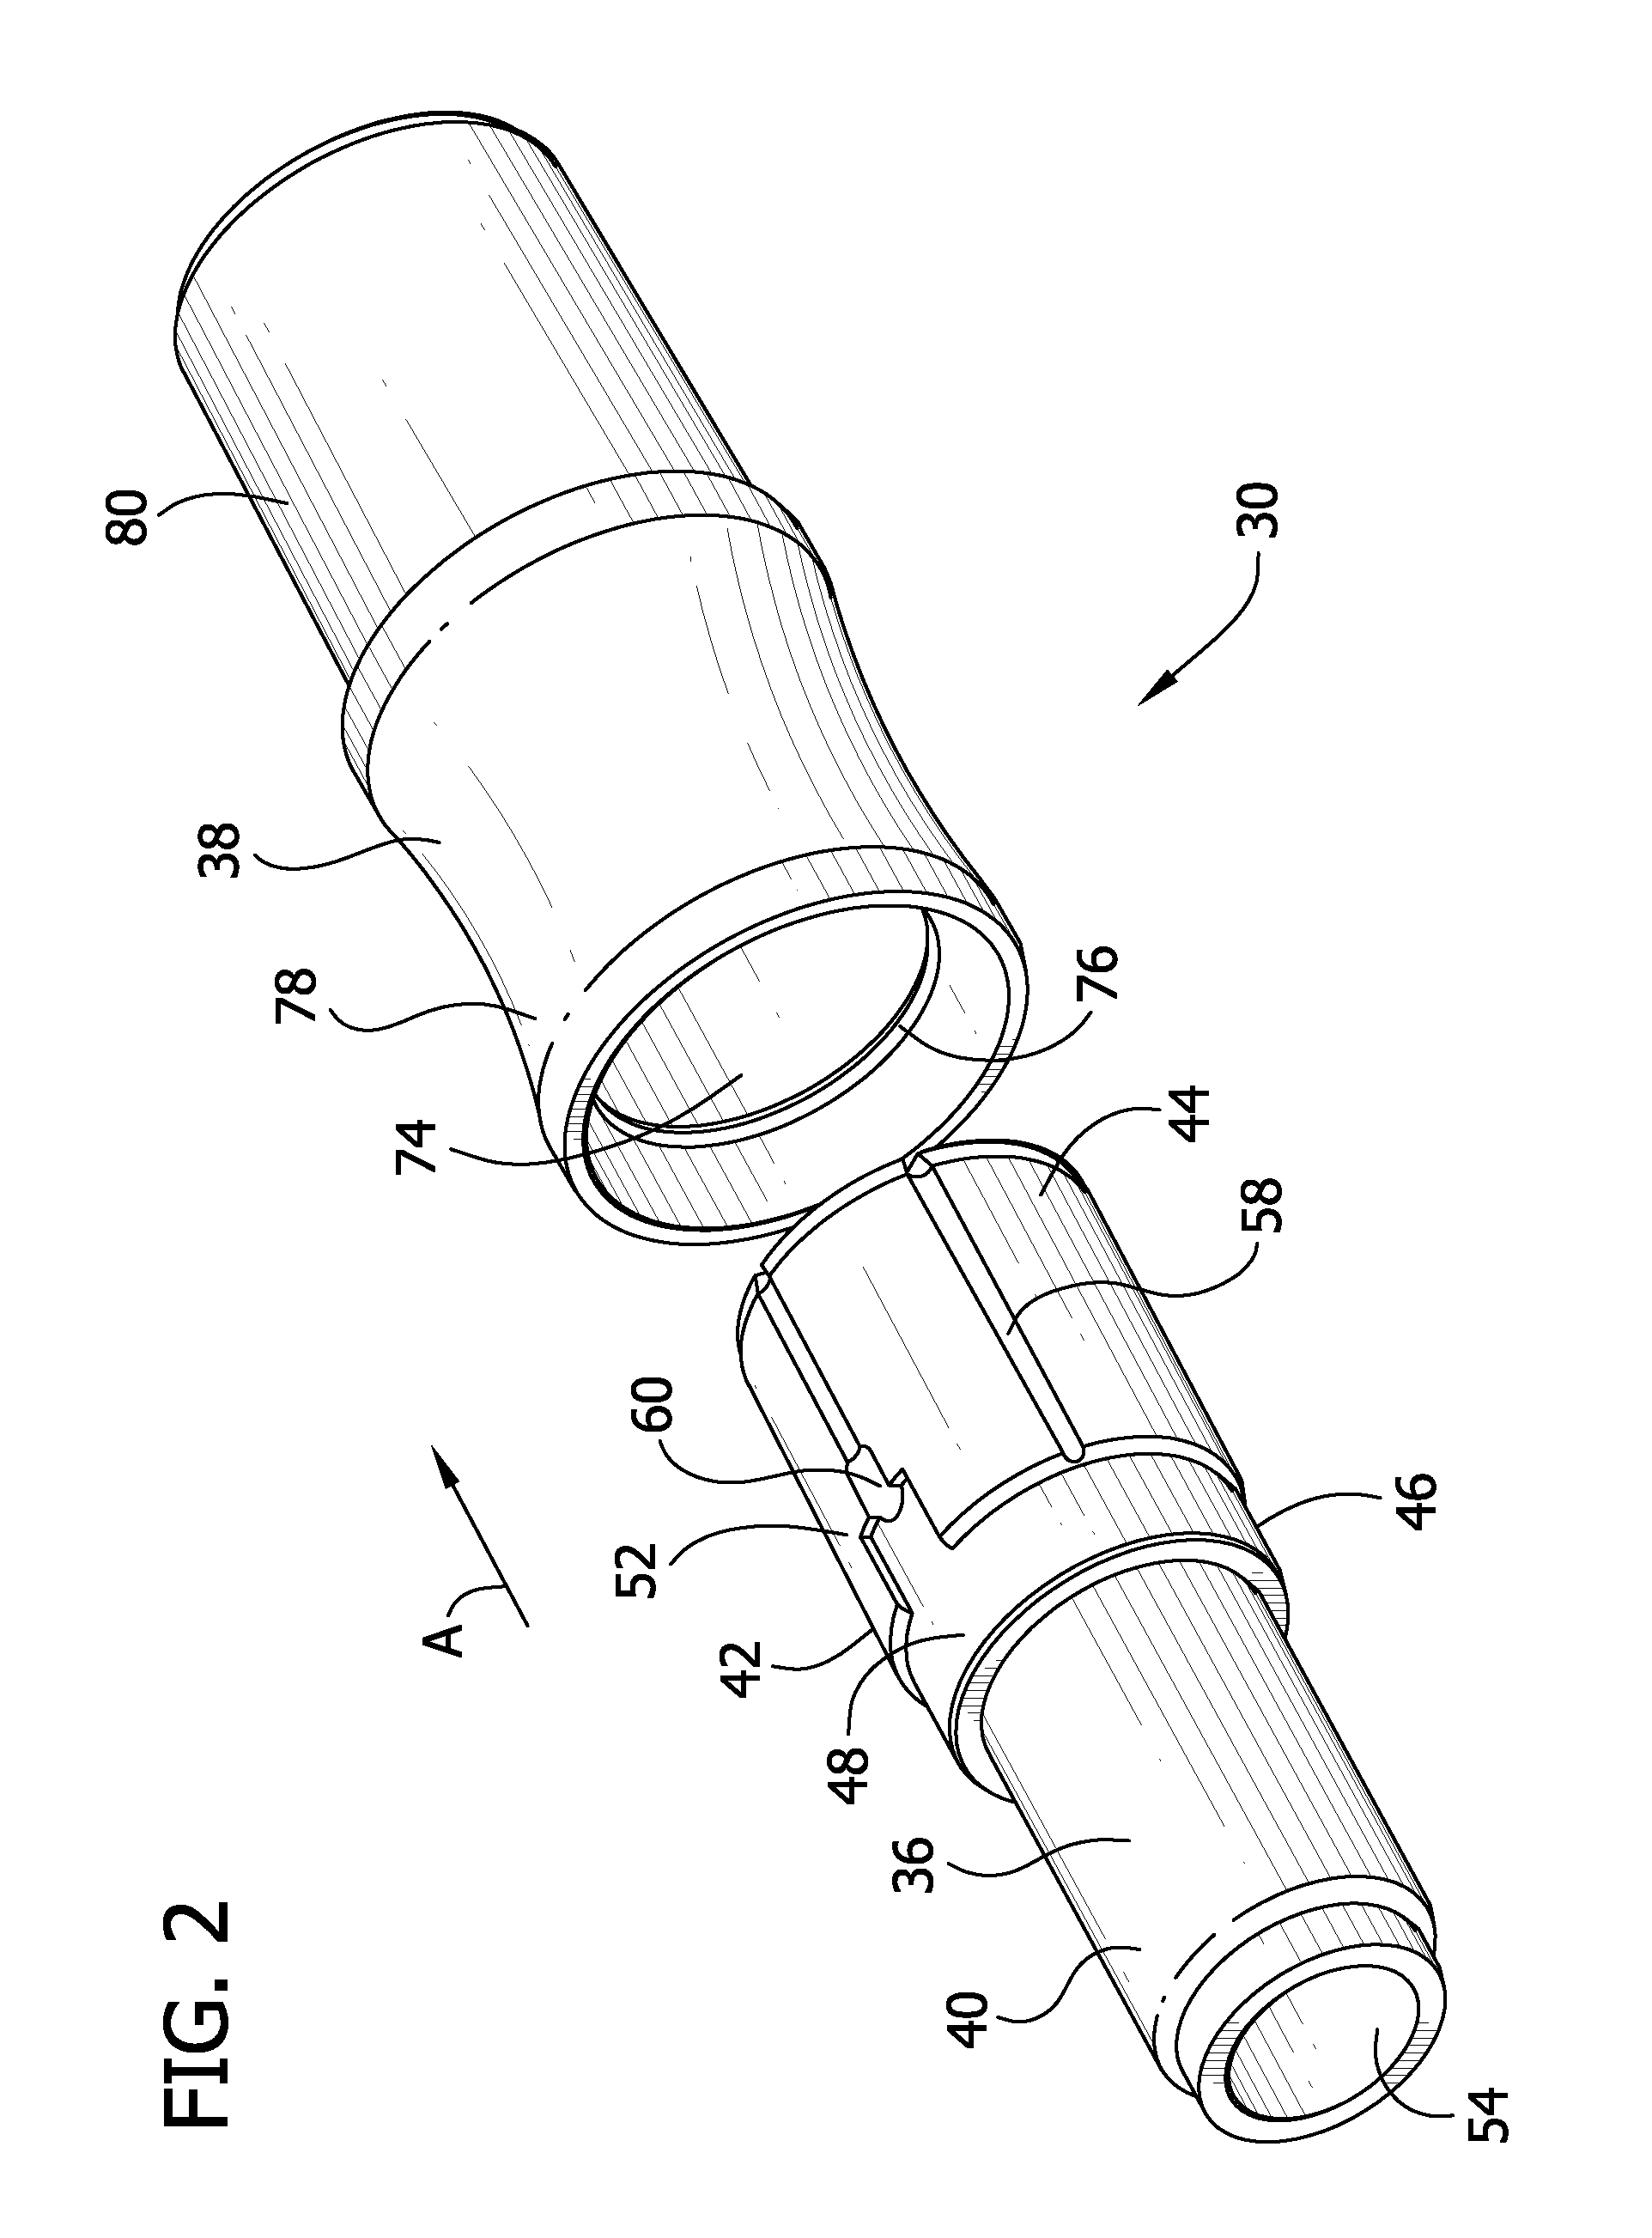 Safety connector assembly